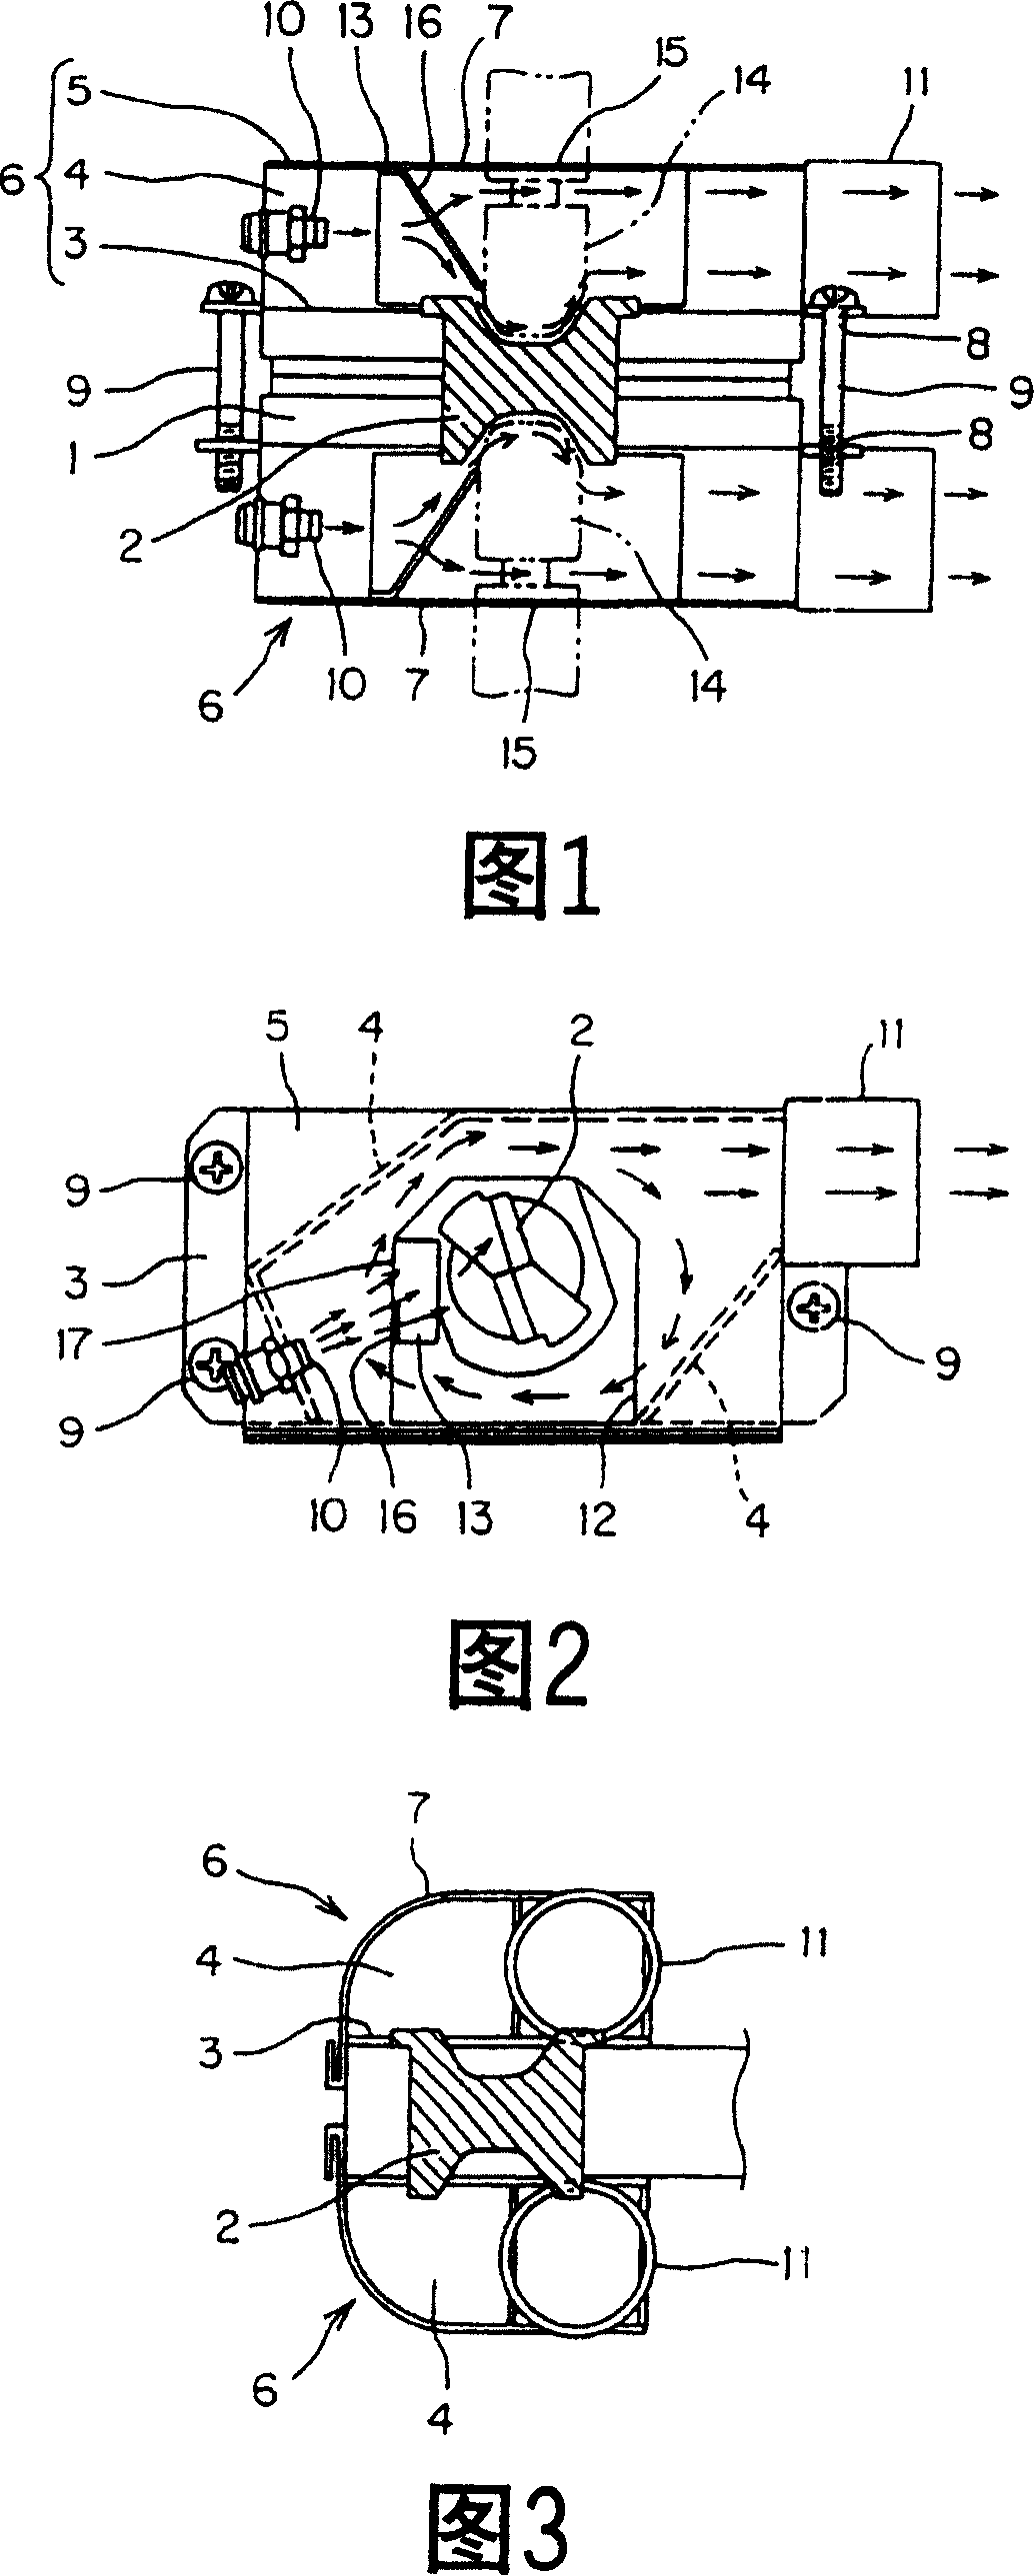 Cuttings recovering apparatus for electrode trimmer